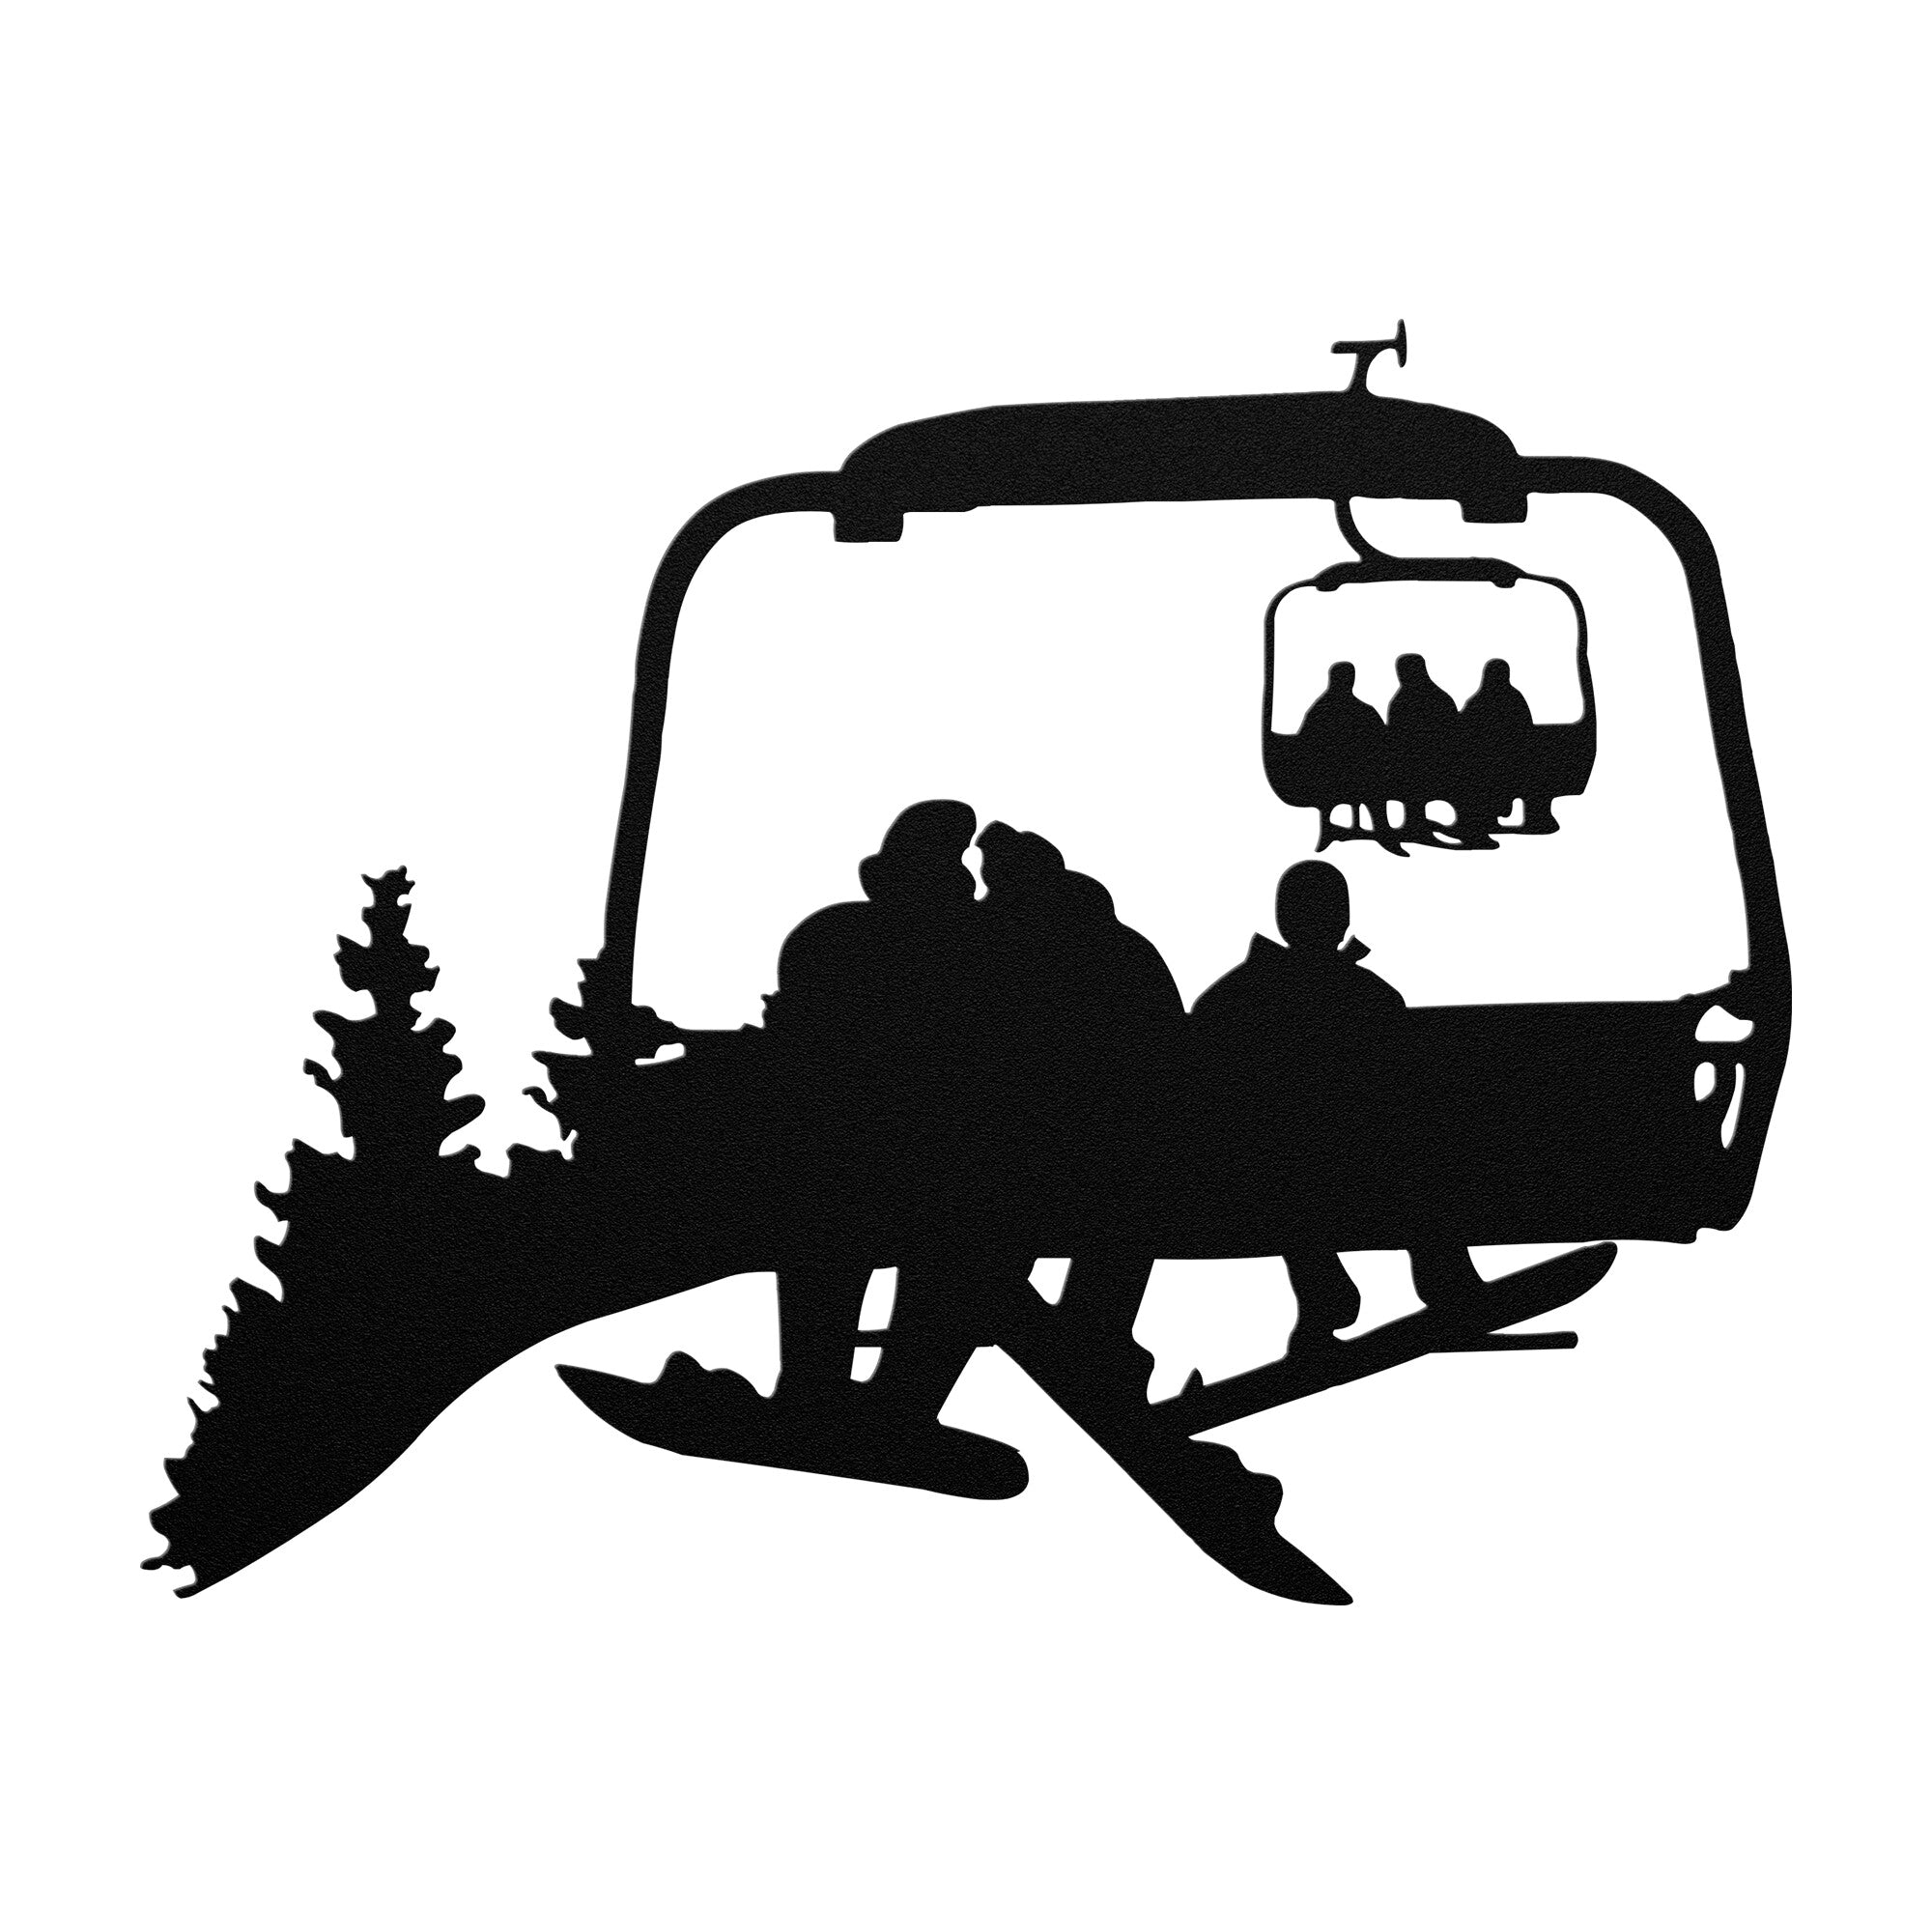 PERSONALIZED CHAIRLIFT SNOWBOARD FAMILY METAL WALL ART, 2 SNOWBOARDING PARENTS 1 SNOWBOARDING CHILD  (🇺🇸 MADE IN THE USA)